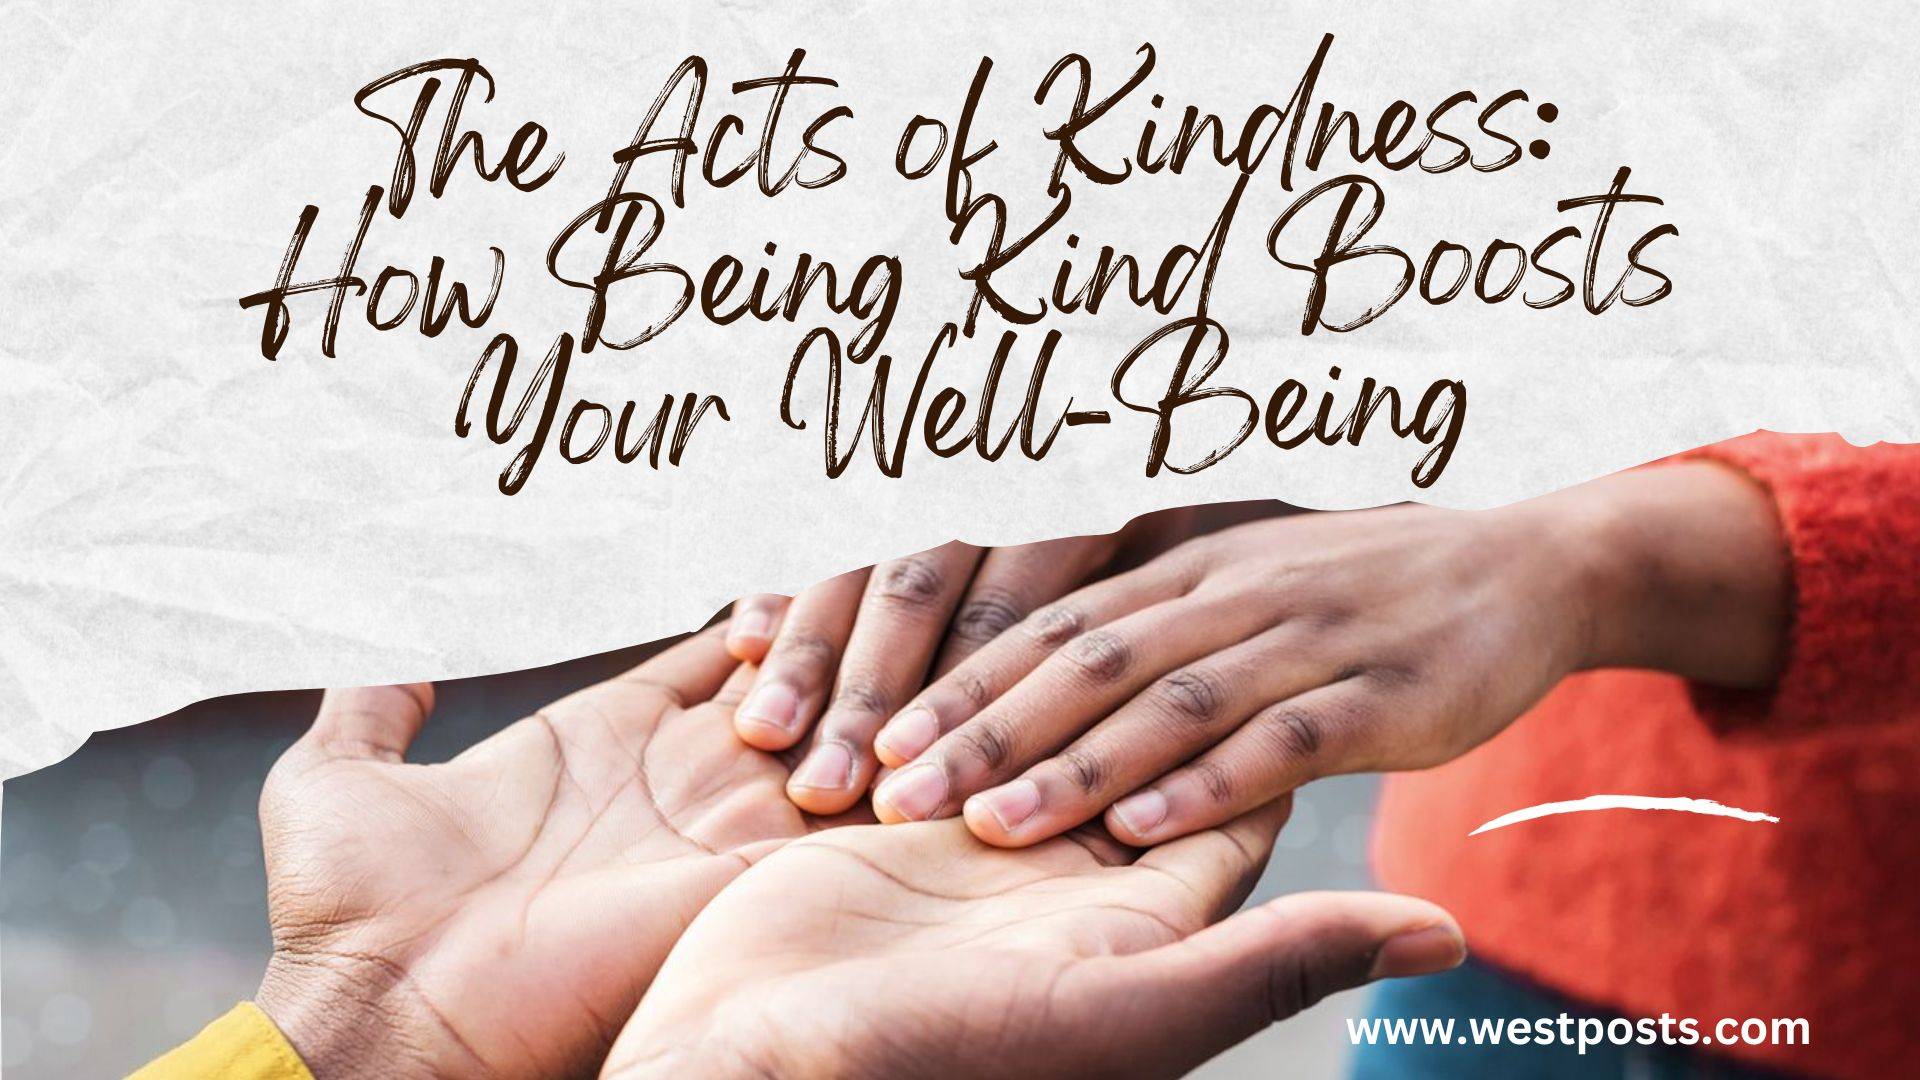 The Acts of Kindness: How Being Kind Boosts Your Well-Being